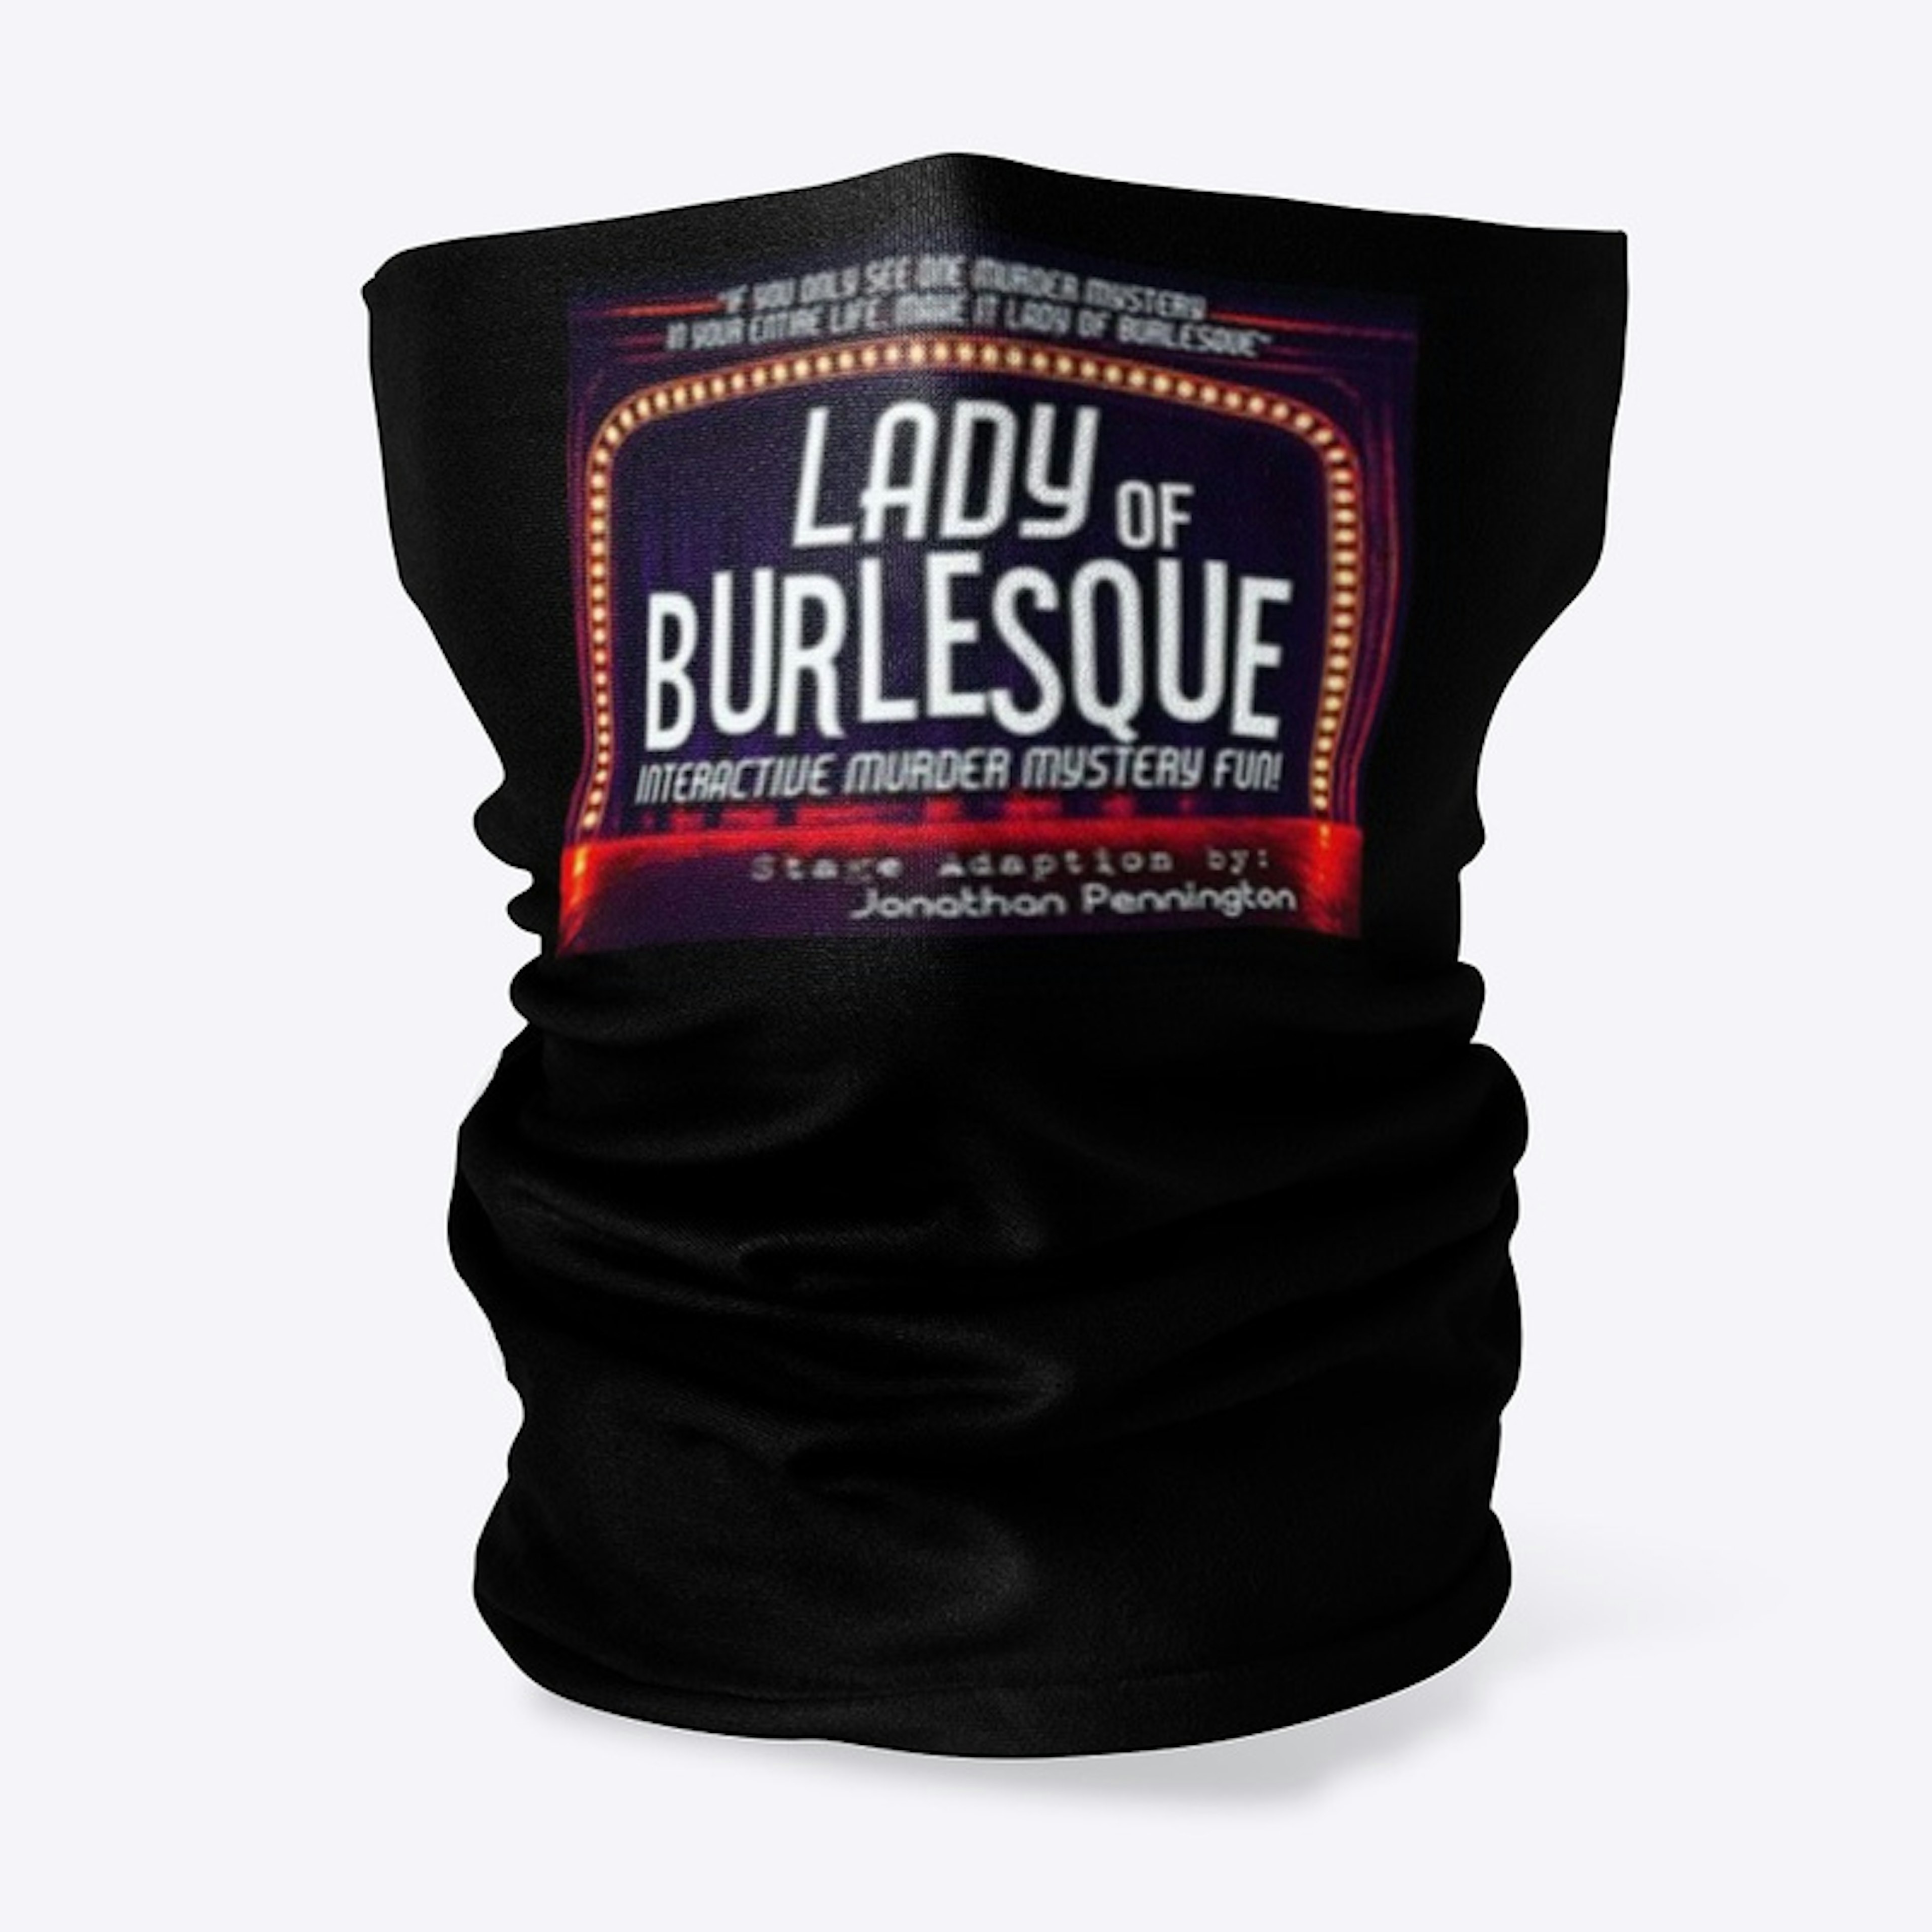 LADY OF BURLESQUE: